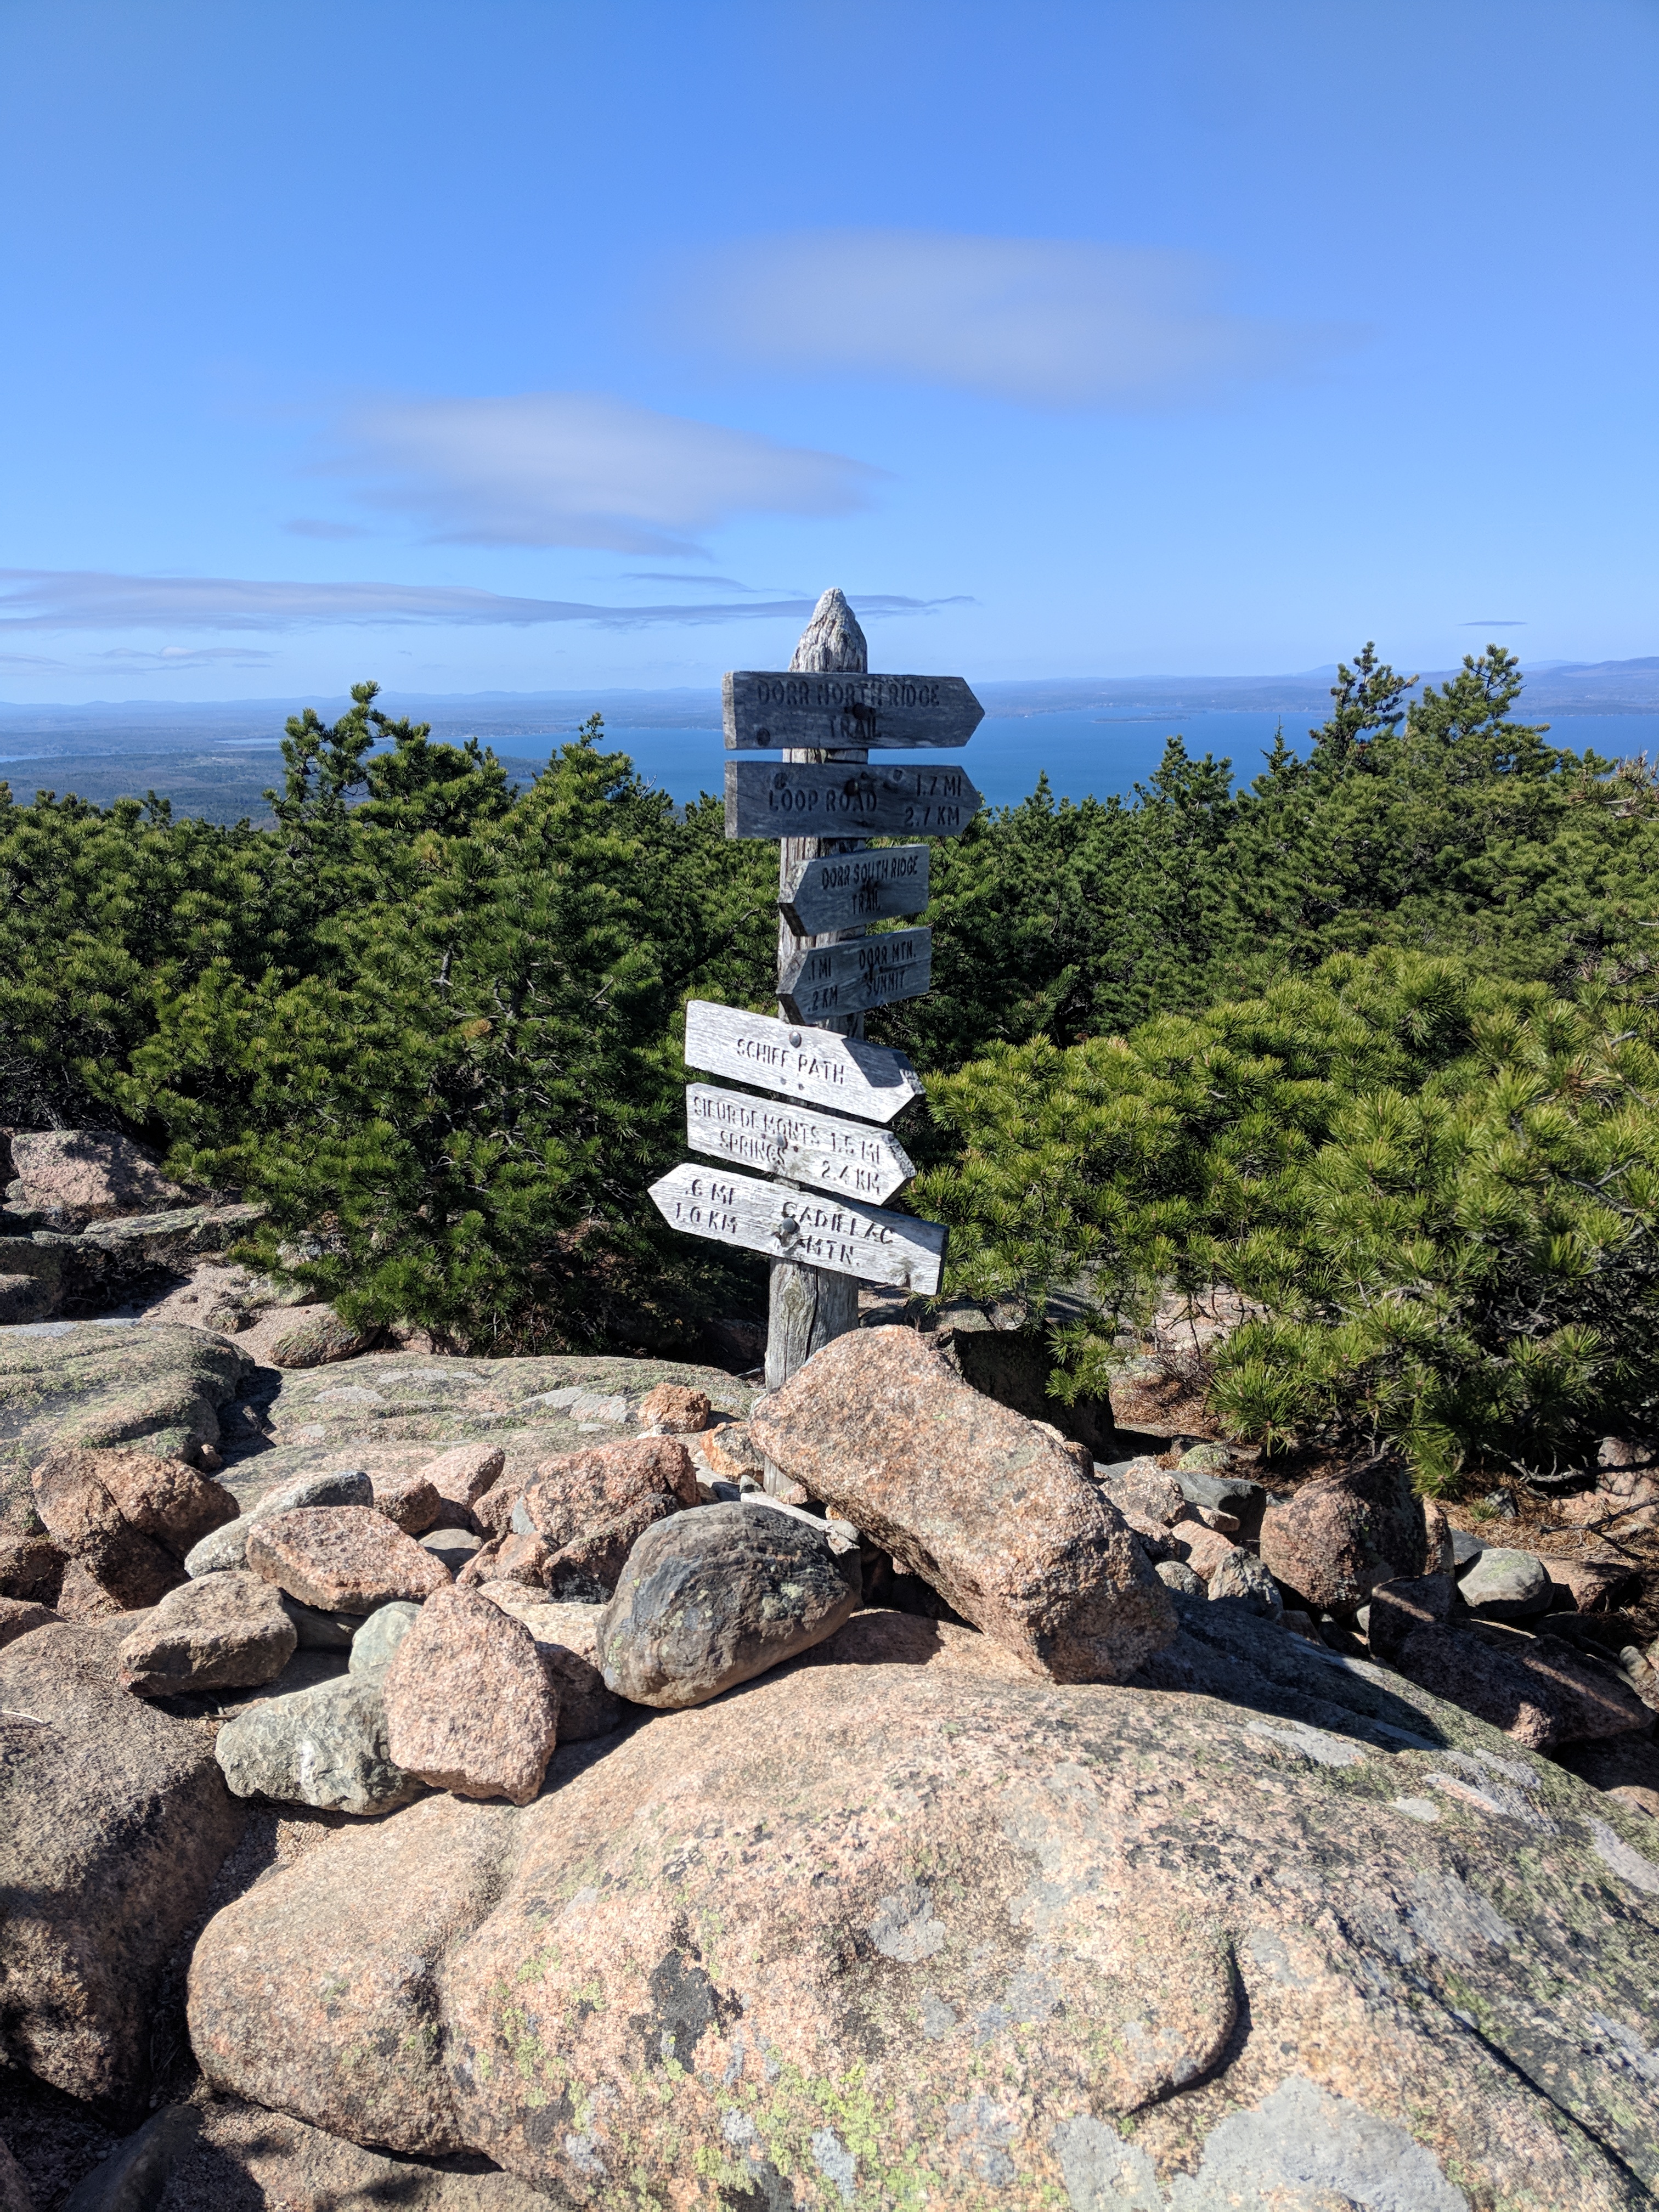 Sign atop a mountain in Acadia showing the direction for 7 different trails